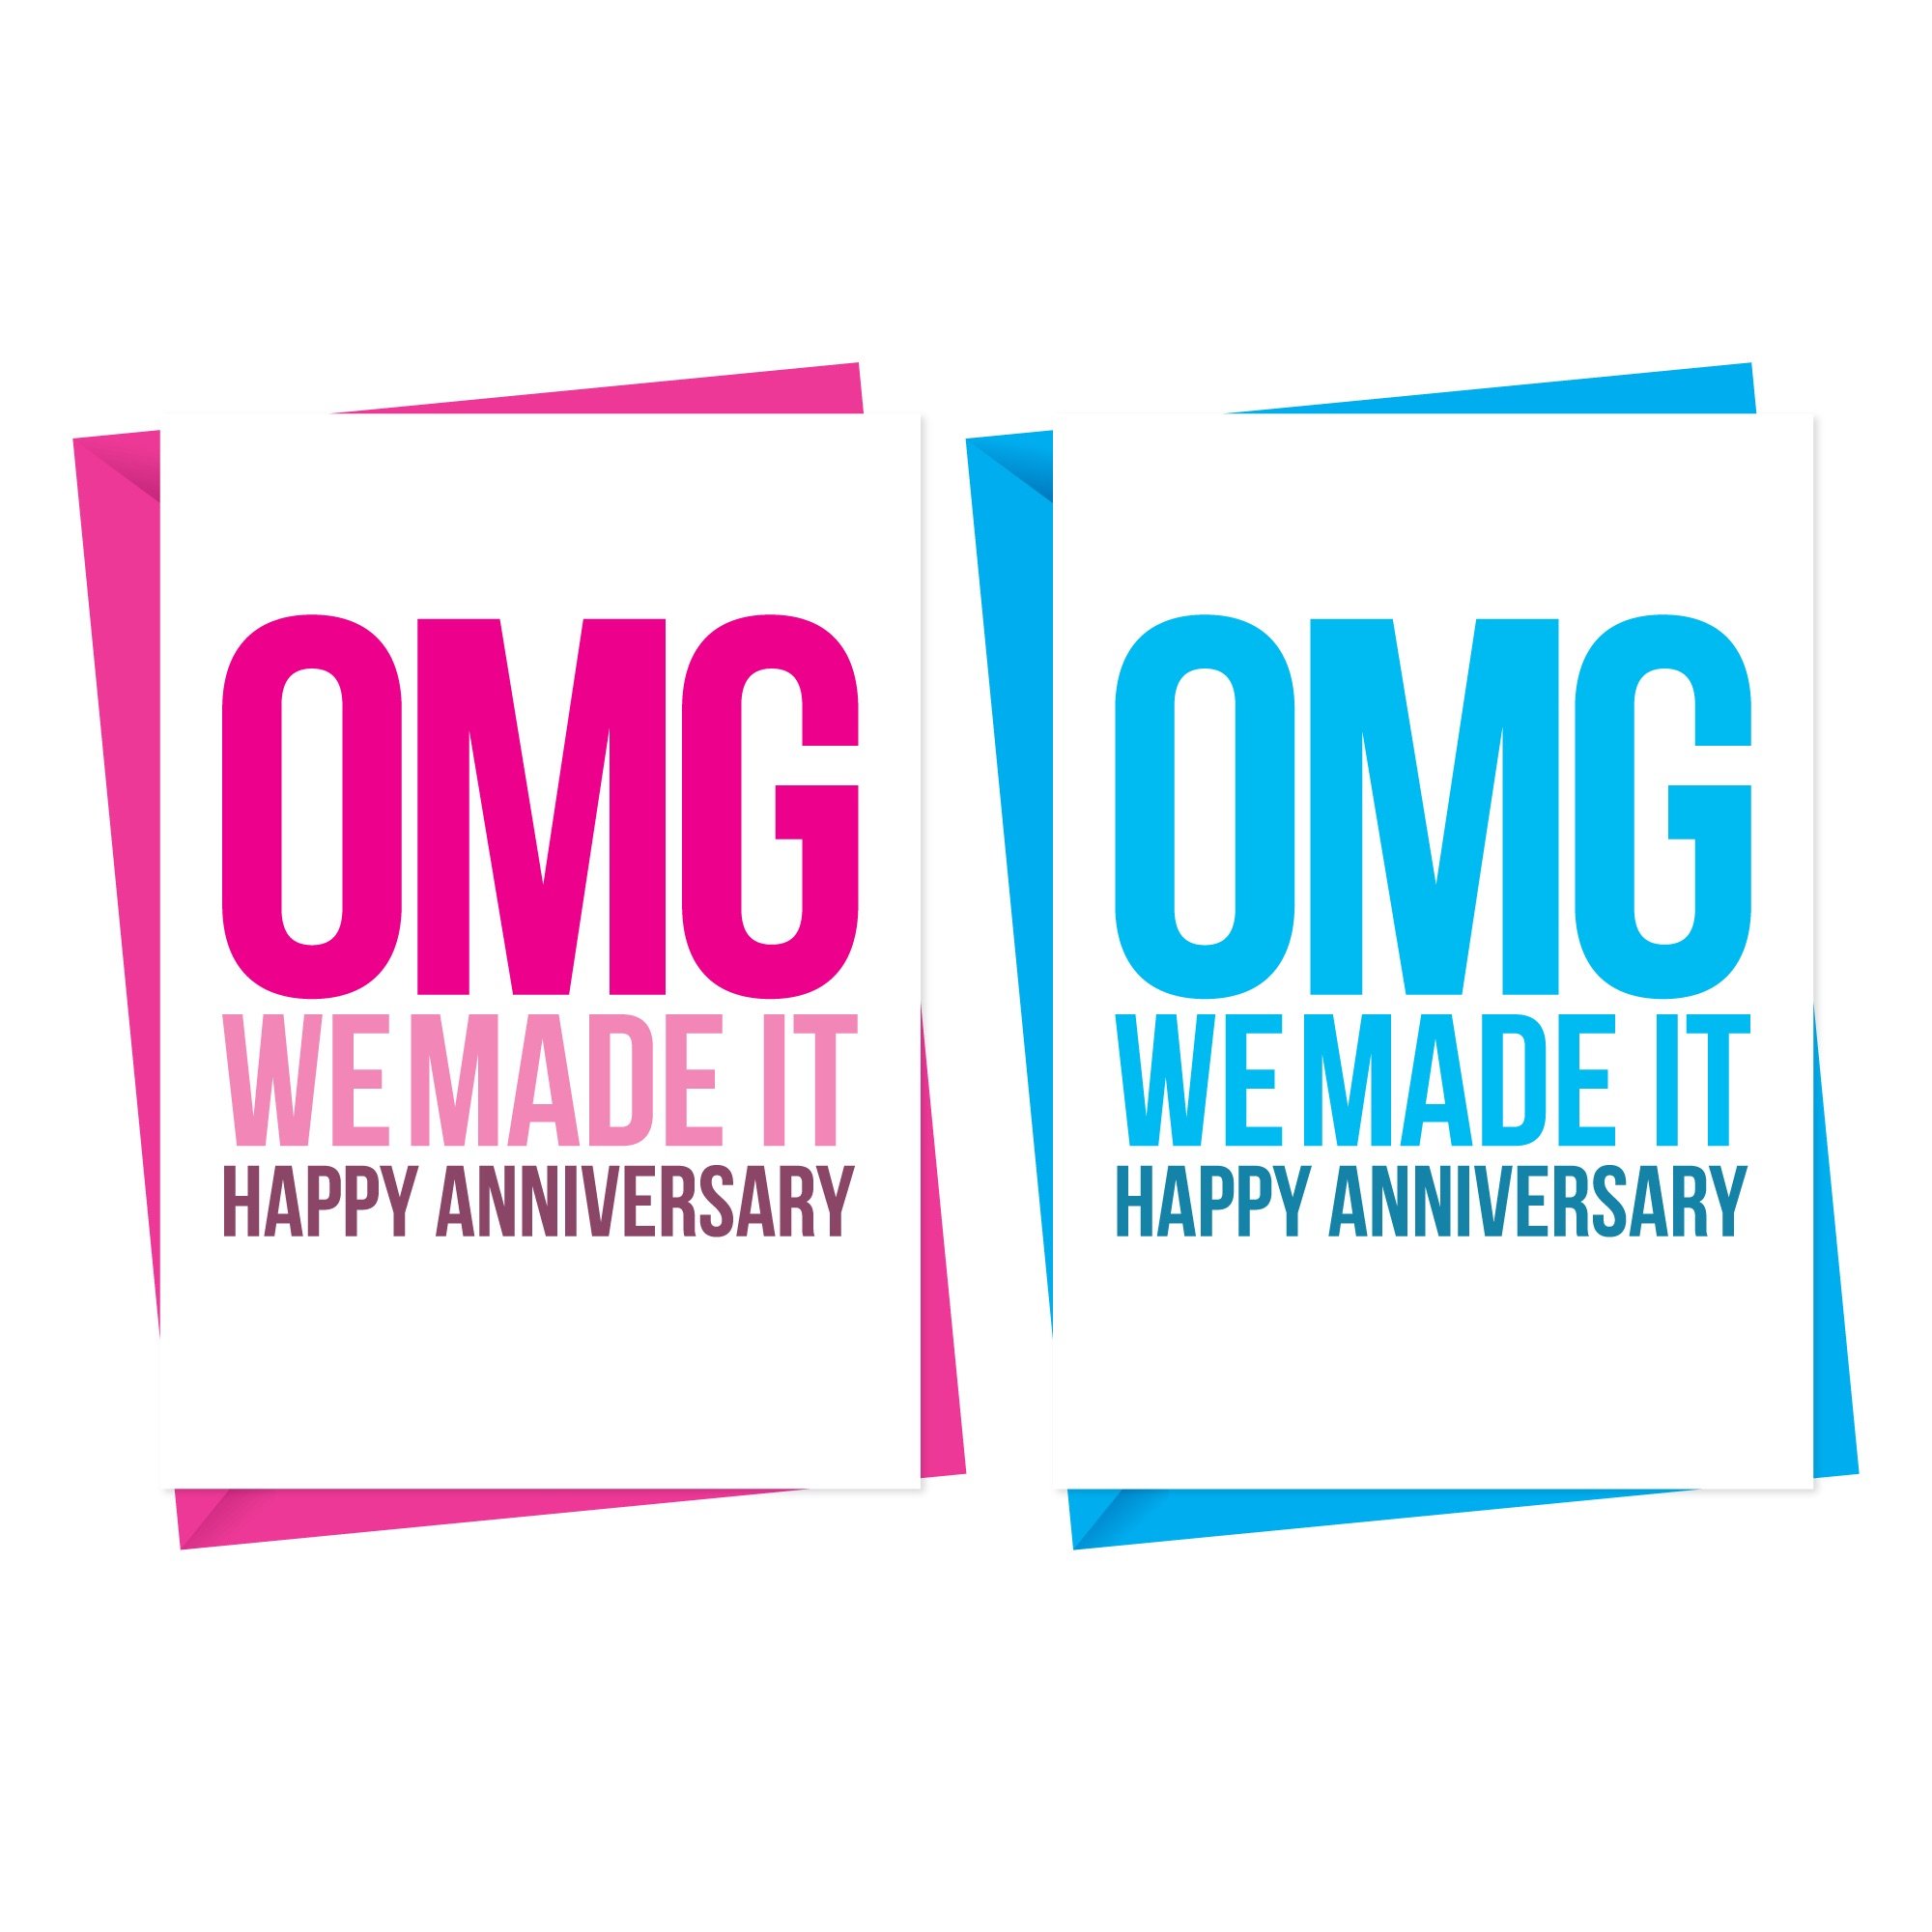 OMG We Made It Funny Anniversary Card